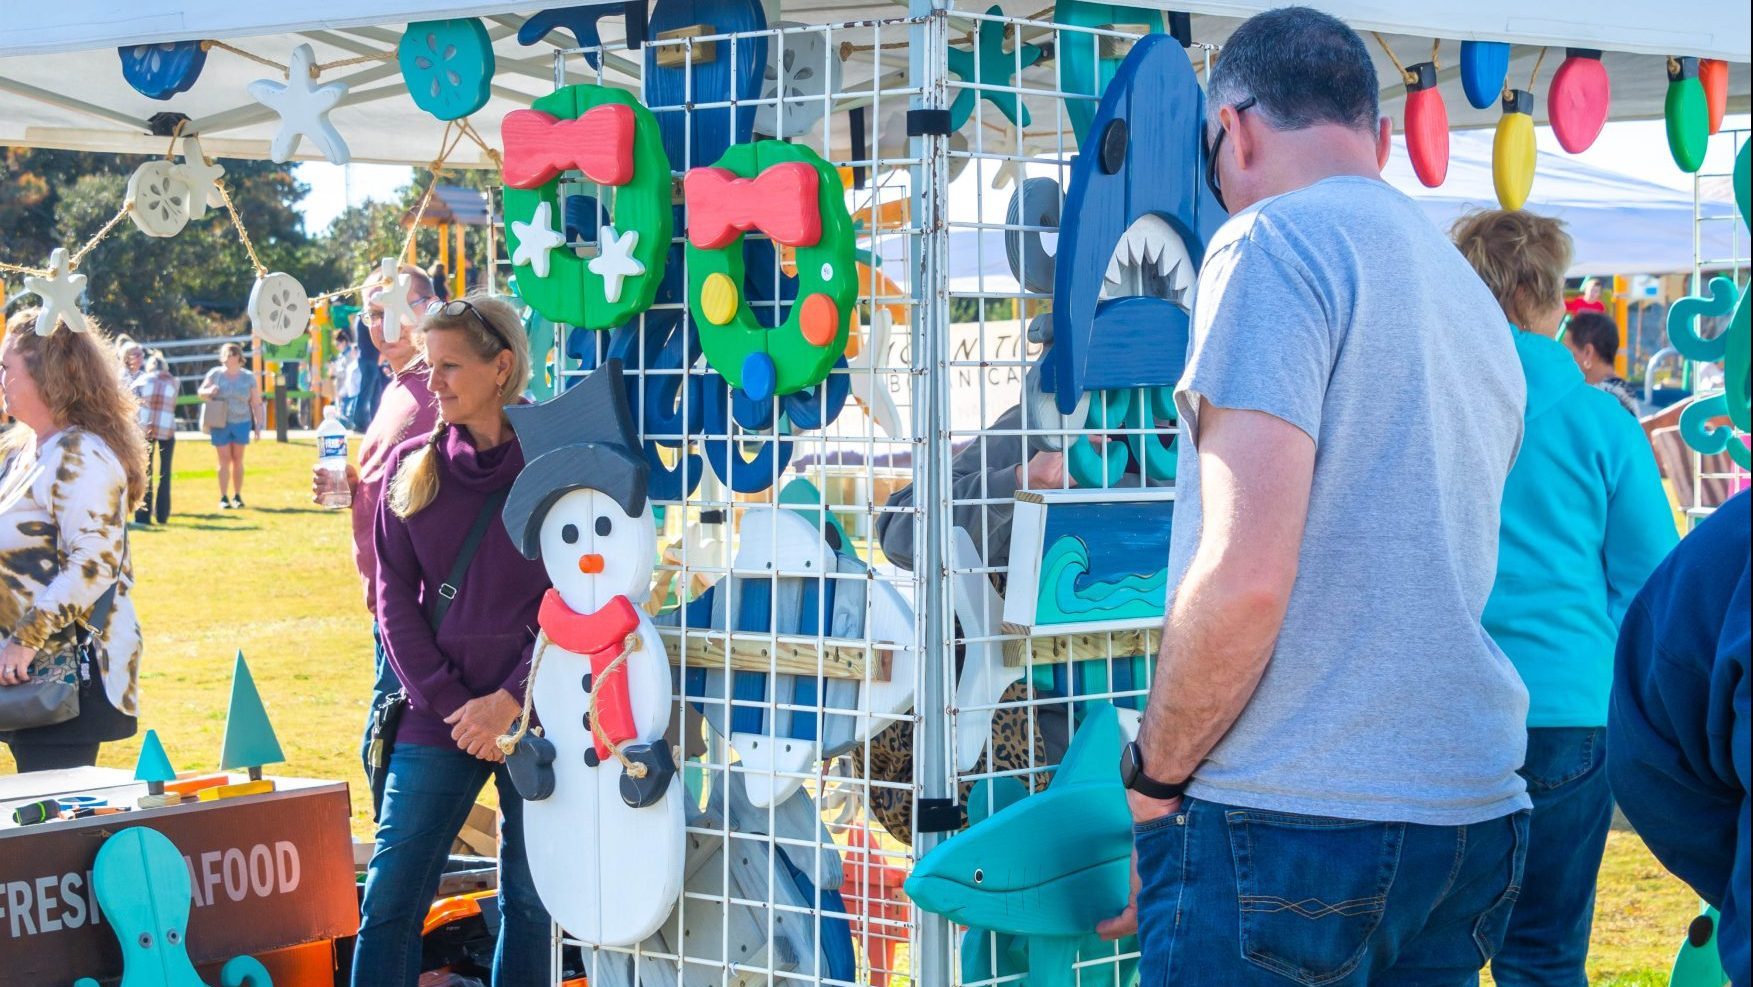 Christmas season in Nags Head includes holiday markets, home and business decorating contests